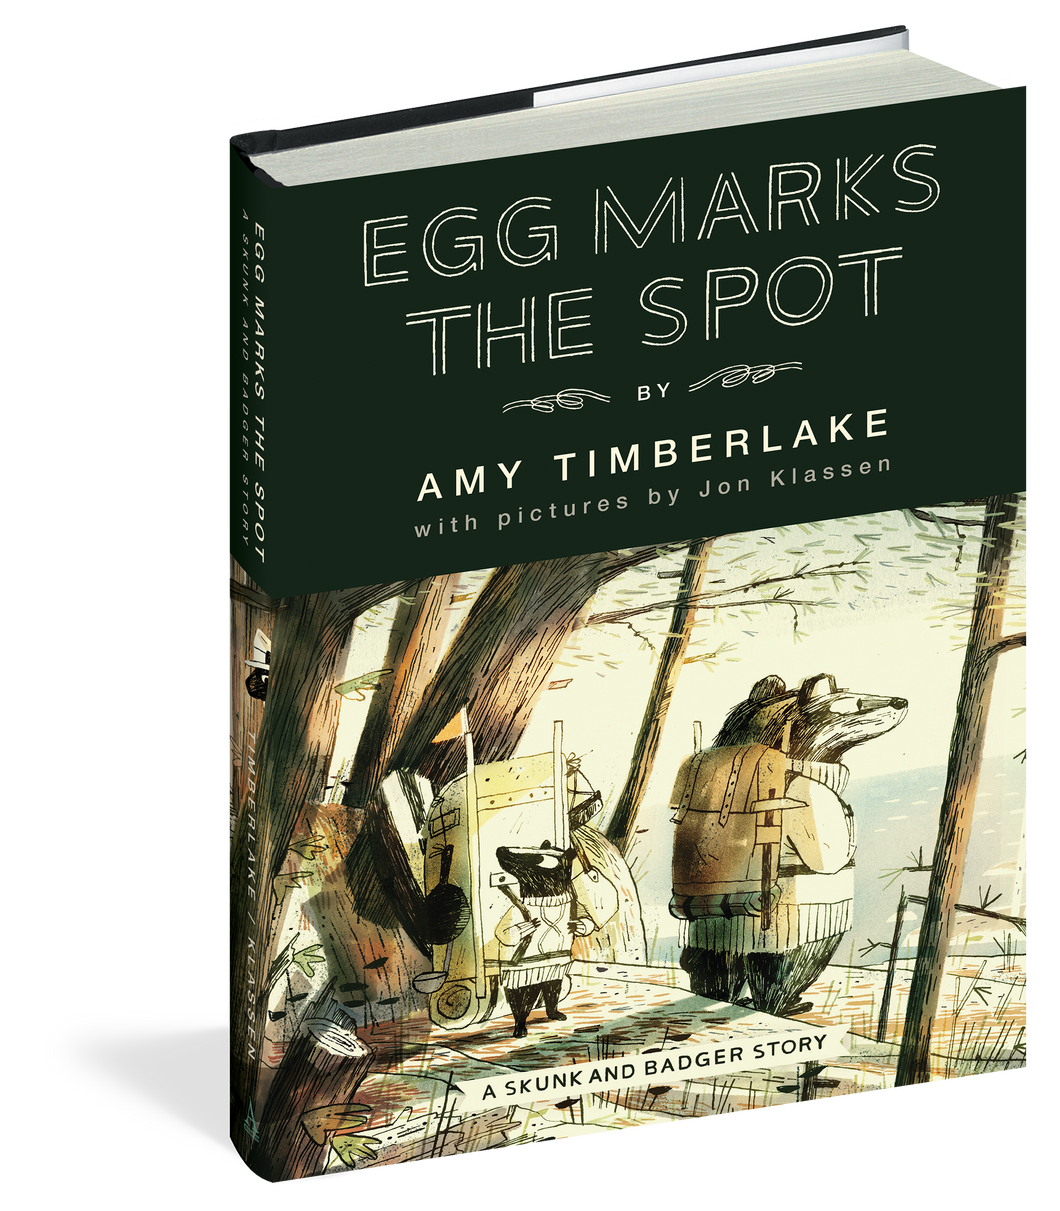 Egg Marks the Spot (Skunk & Badger #2) by Amy Timberlake